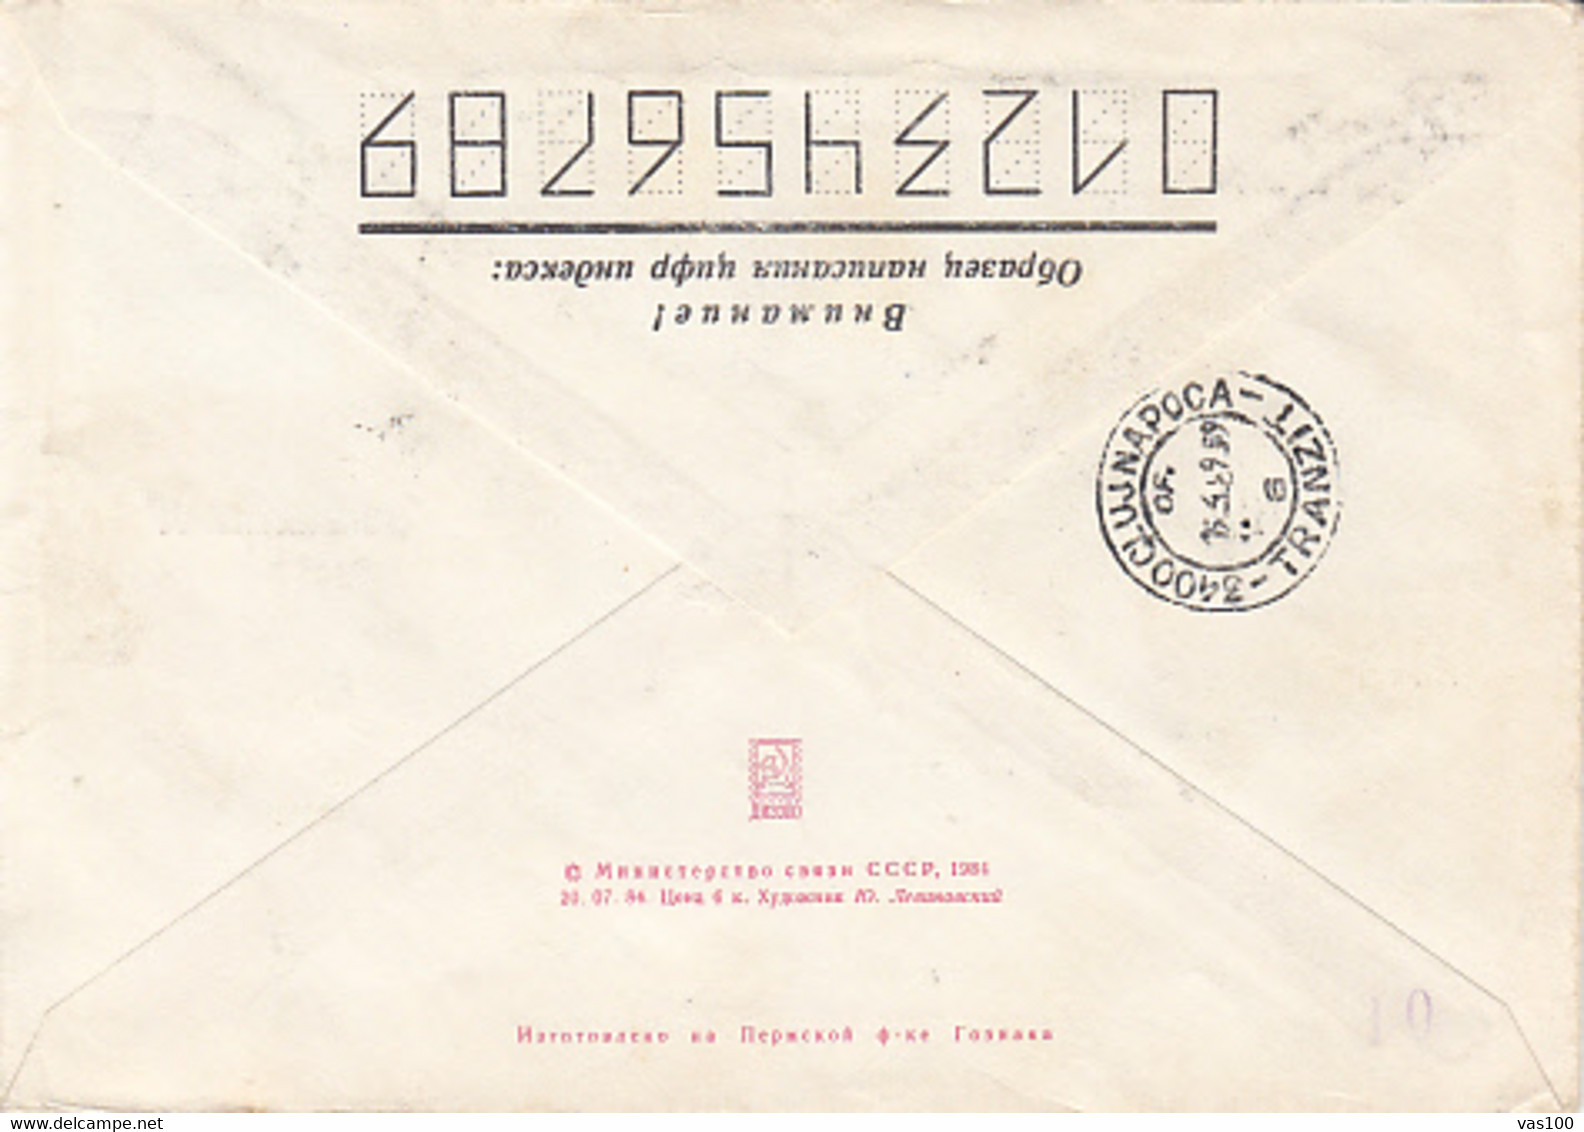 CHILDRENS, PUPPETS THEATRE, REGISTERED COVER STATIONERY, ENTIER POSTAL, 1984, RUSSIA - Puppets